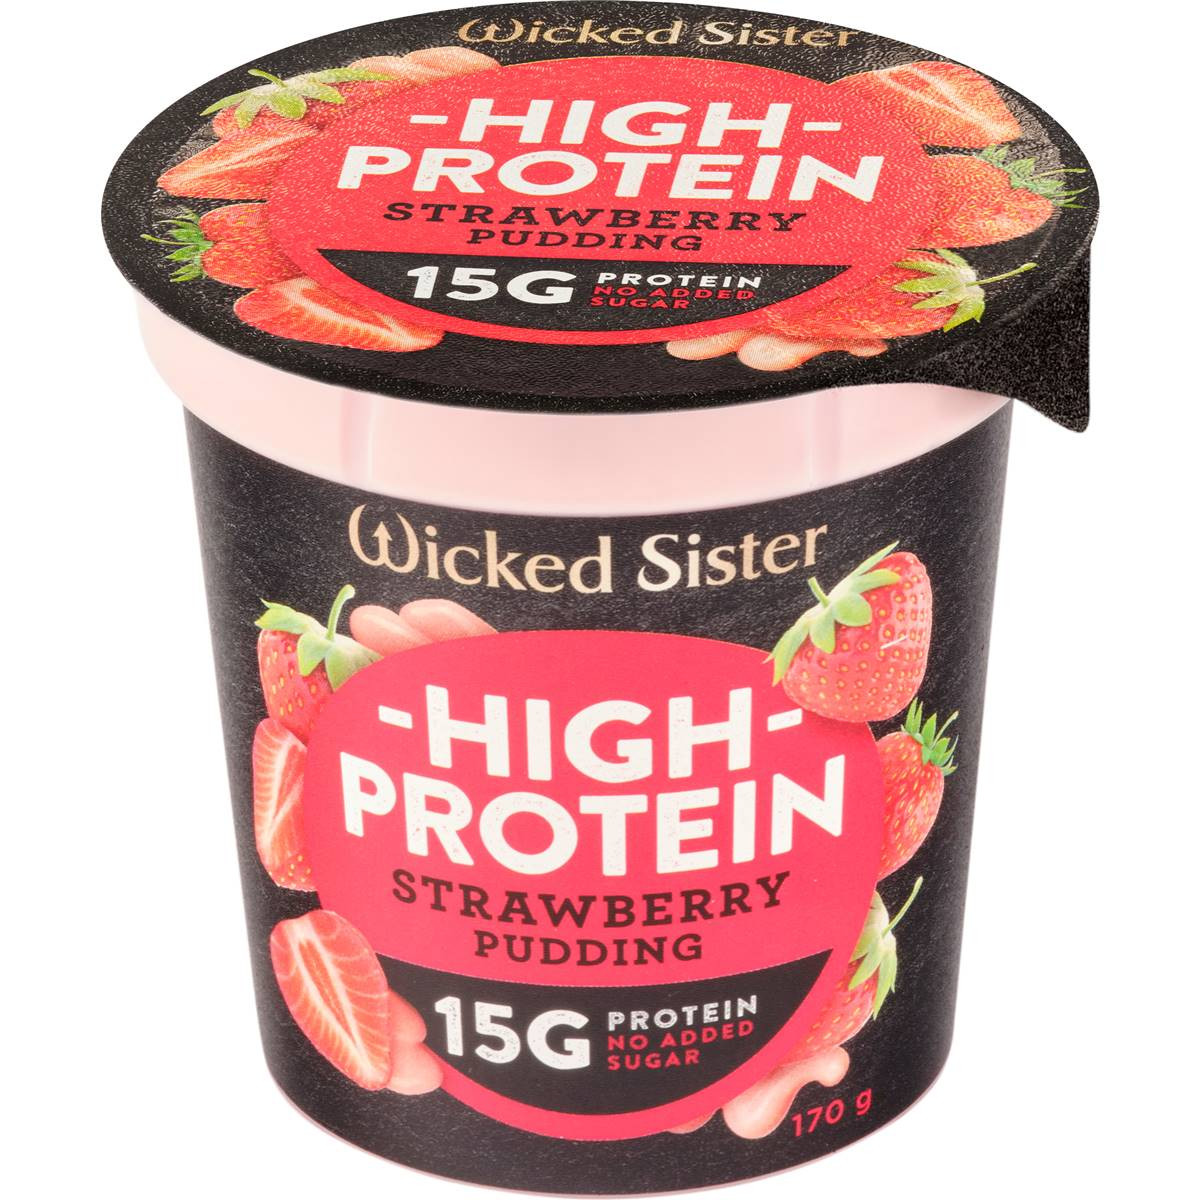 Wicked Sister High Protein Strawberry Pudding 170g